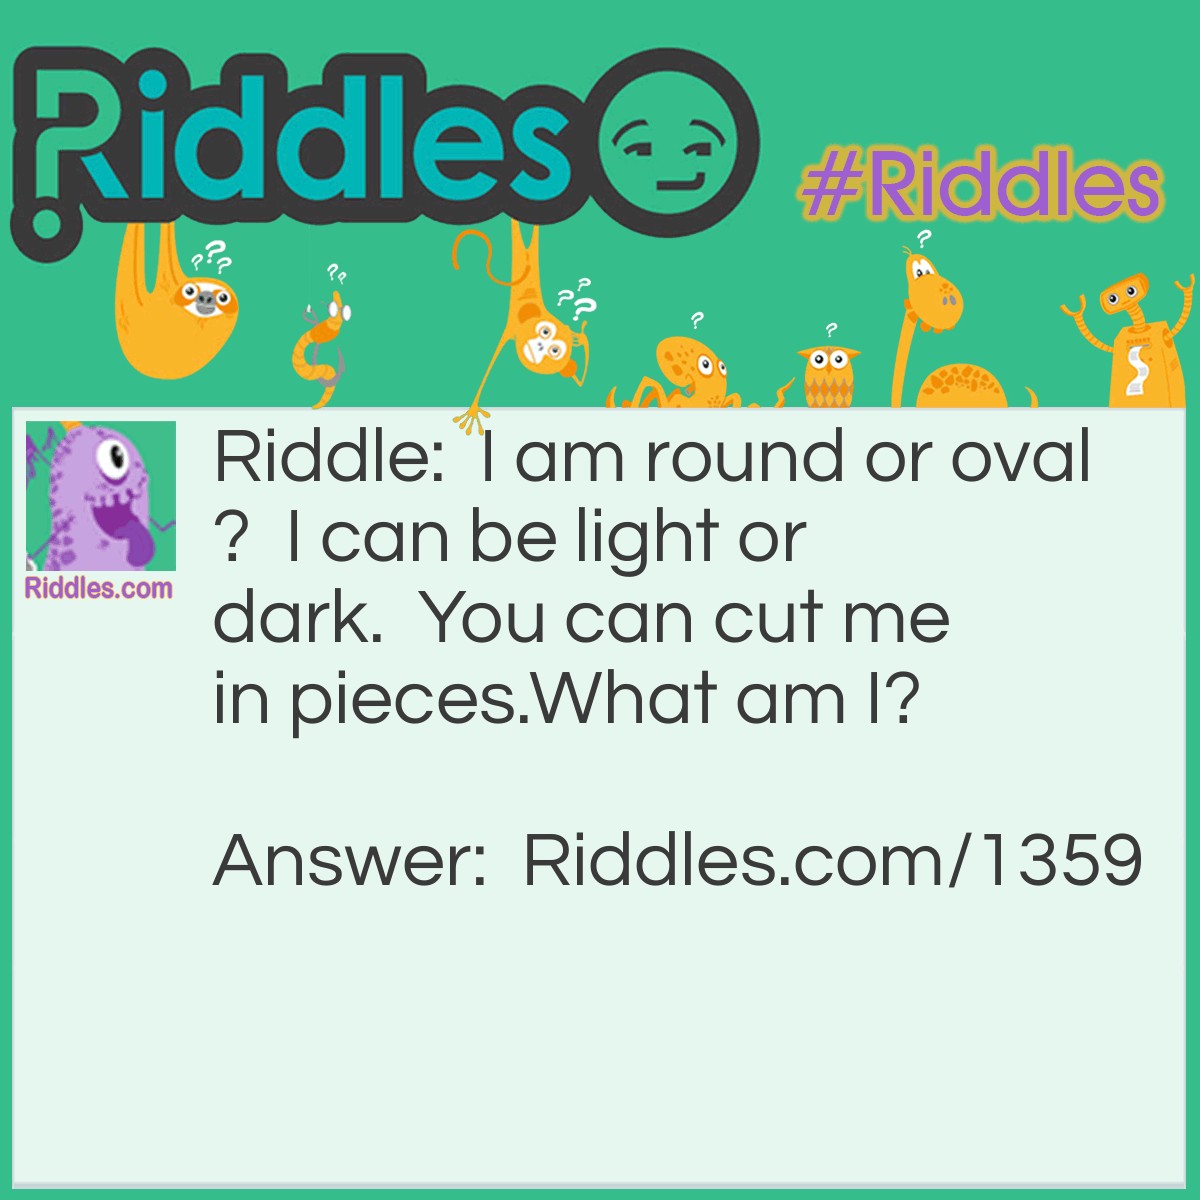 Riddle: I am round or oval?  I can be light or dark.  You can cut me in pieces.
What am I? Answer: A Potato.